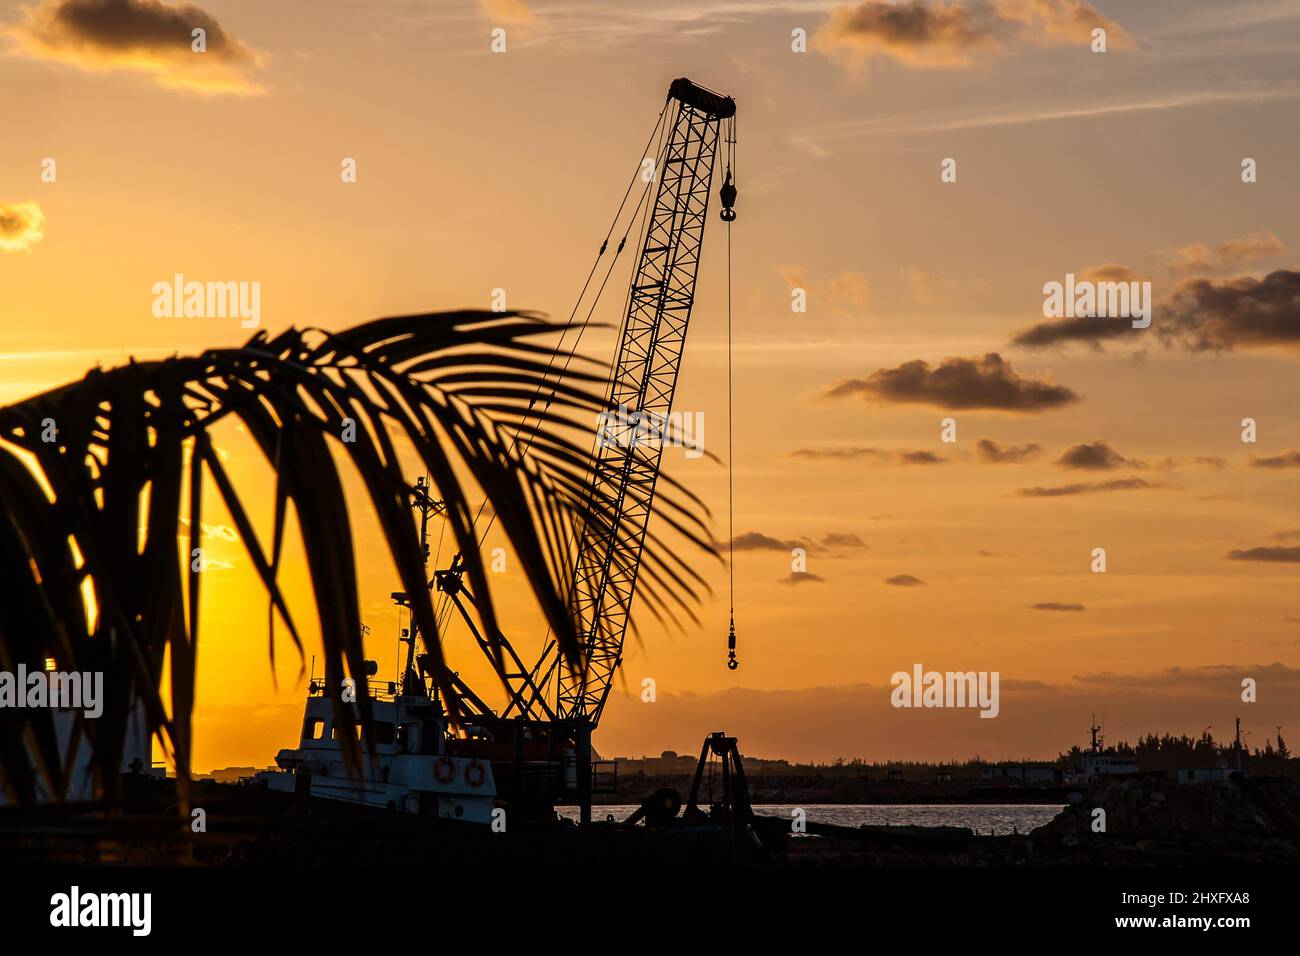 Crane, construction equipment, on a boat. Photo taken at sunset in Cuba. High contrast orange and black photography. Stock Photo